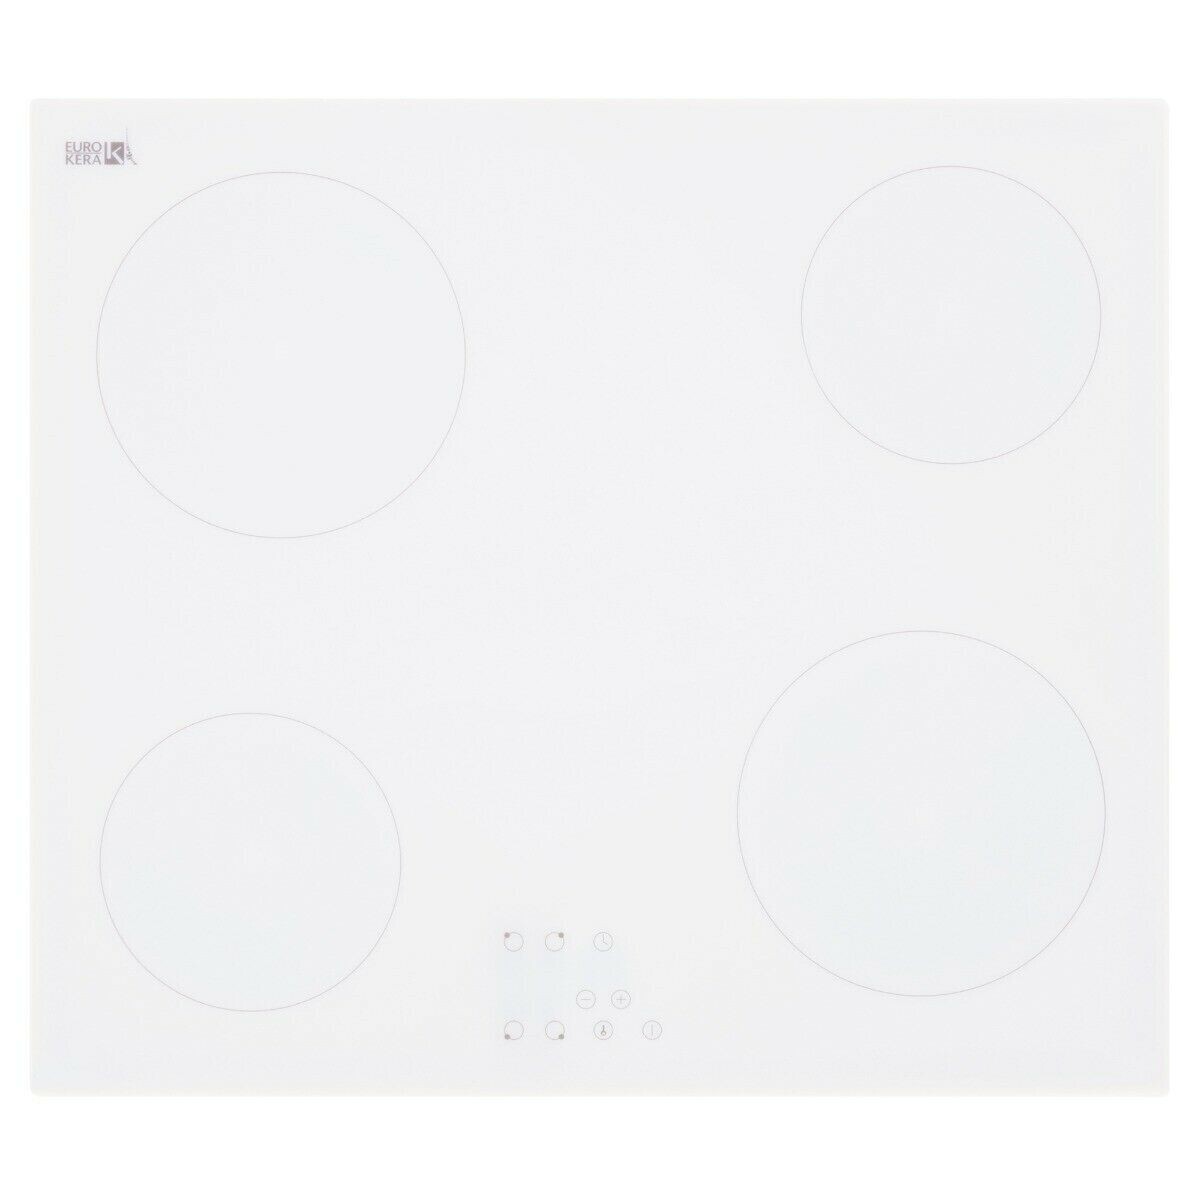 Electric 60cm 4-Zone touch control Ceramic Hob in White - Brand New